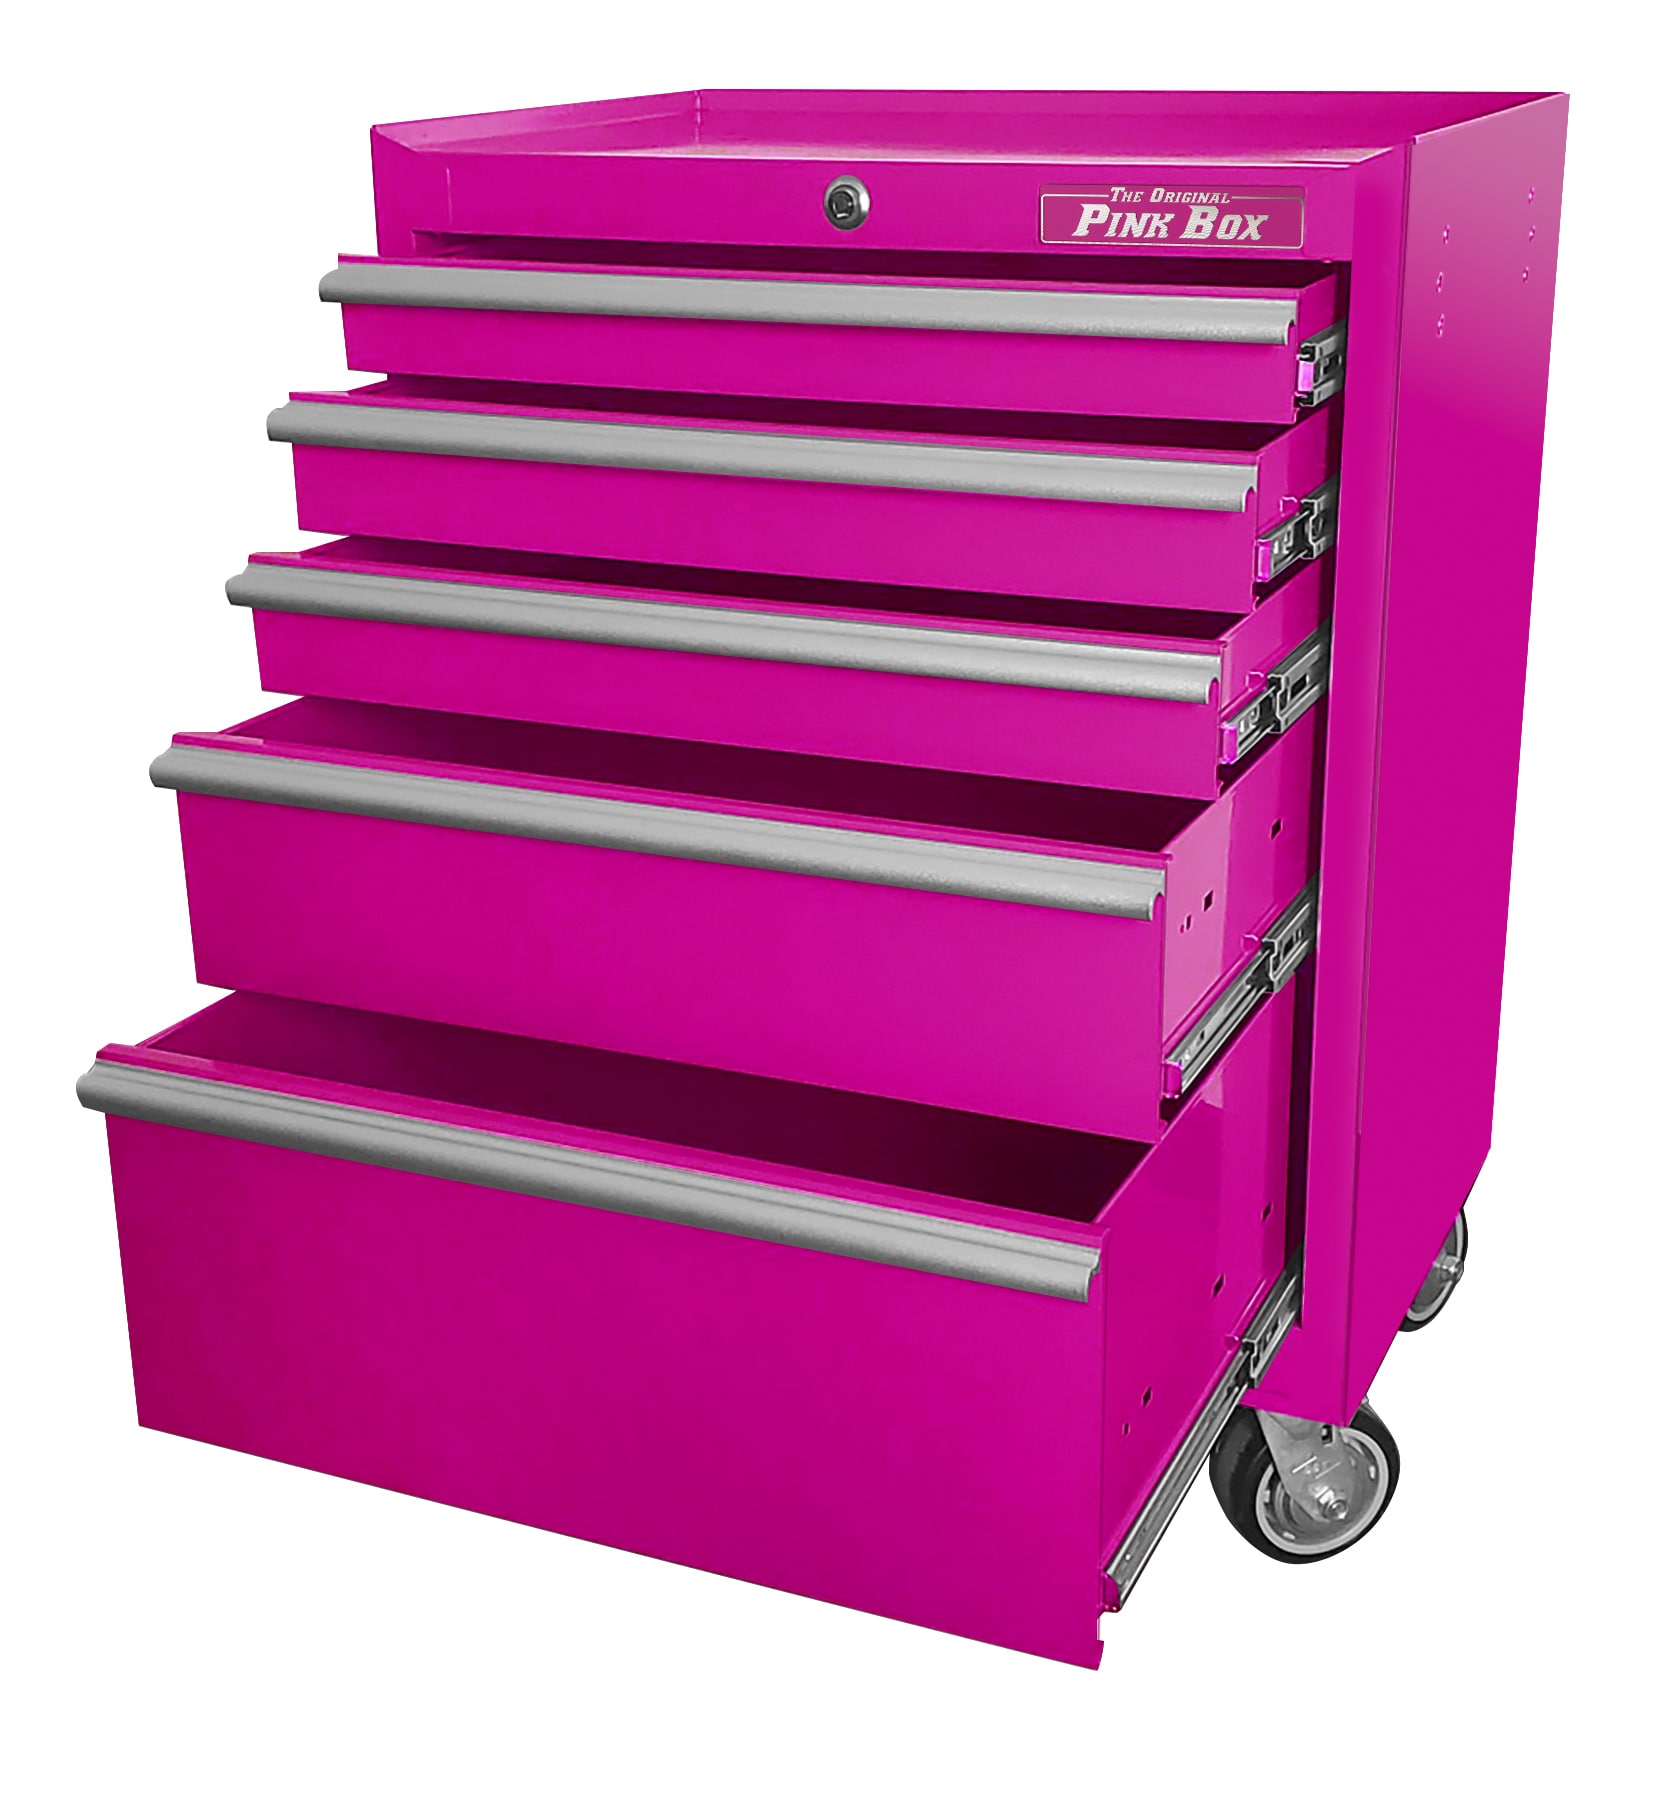 Viper Tool Storage 26.62-in W x 37.5-in H 5-Drawer Steel Rolling